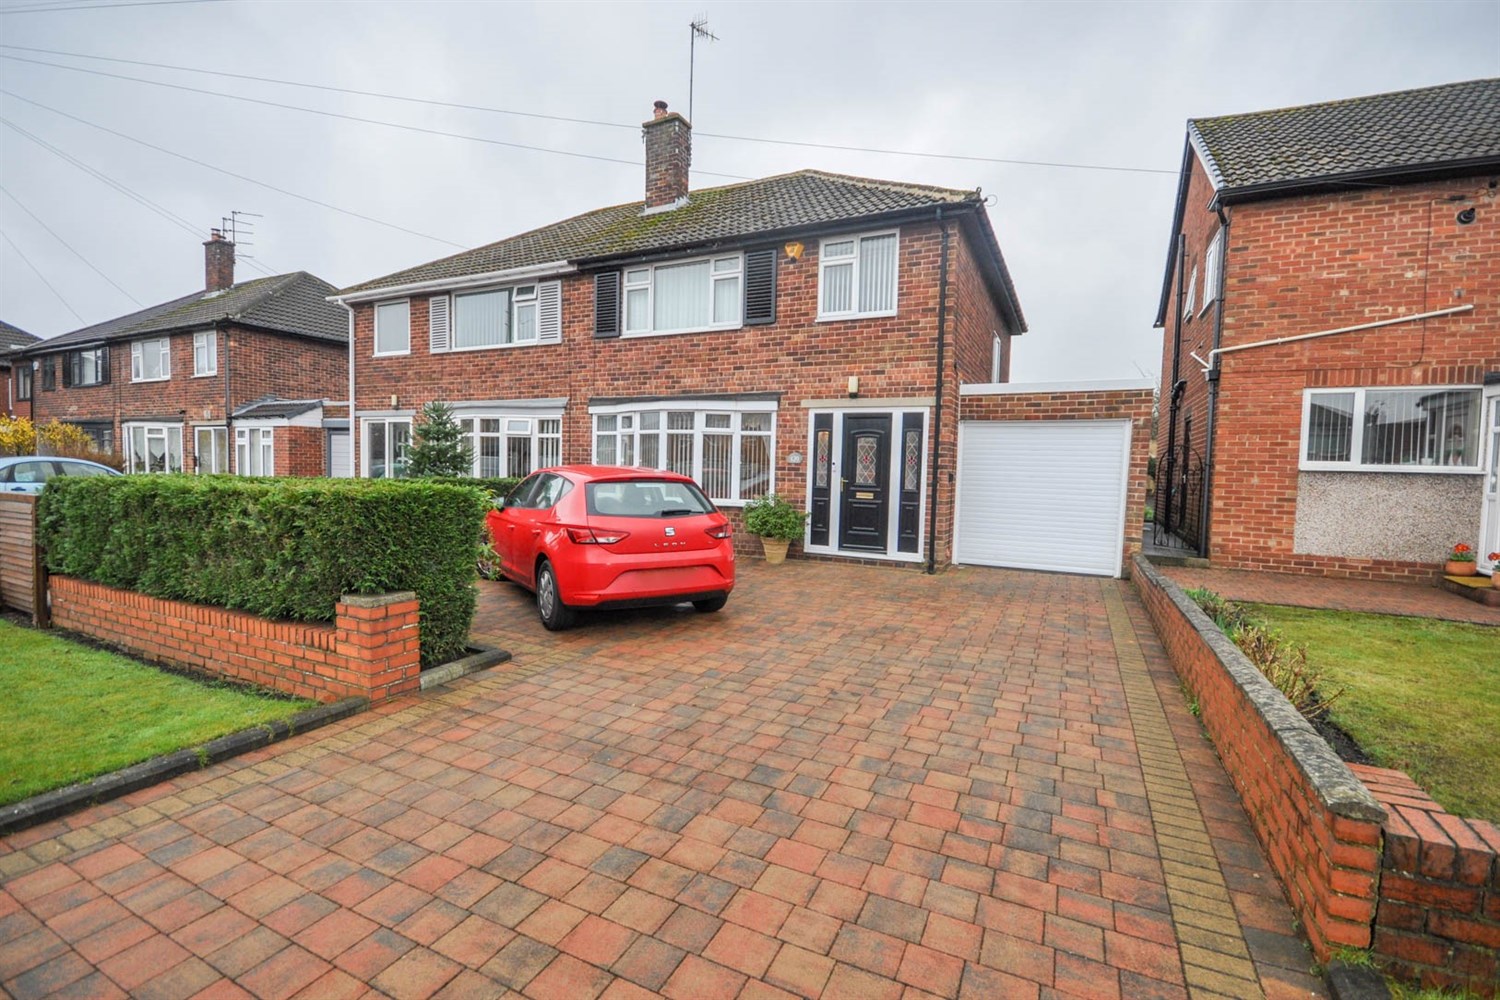 3 bed semi-detached house for sale in Regent Farm Road, Gosforth - Property Image 1